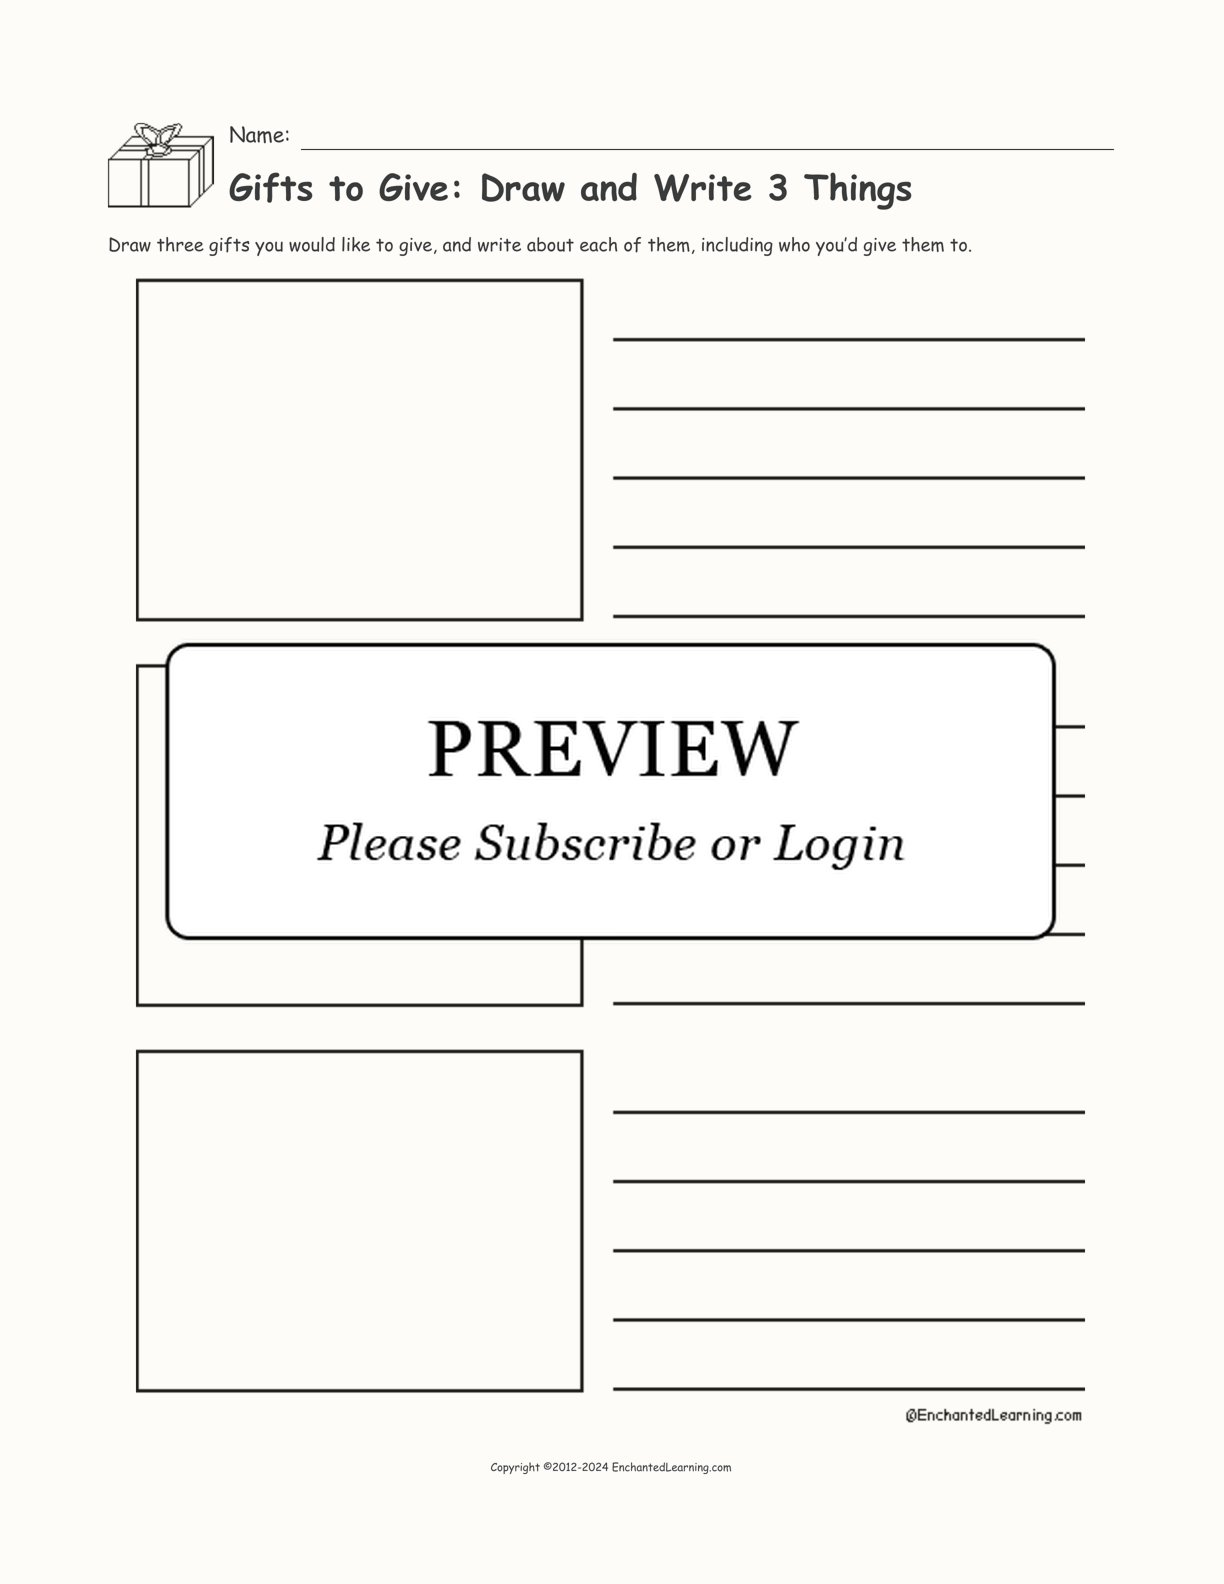 Gifts to Give: Draw and Write 3 Things interactive printout page 1